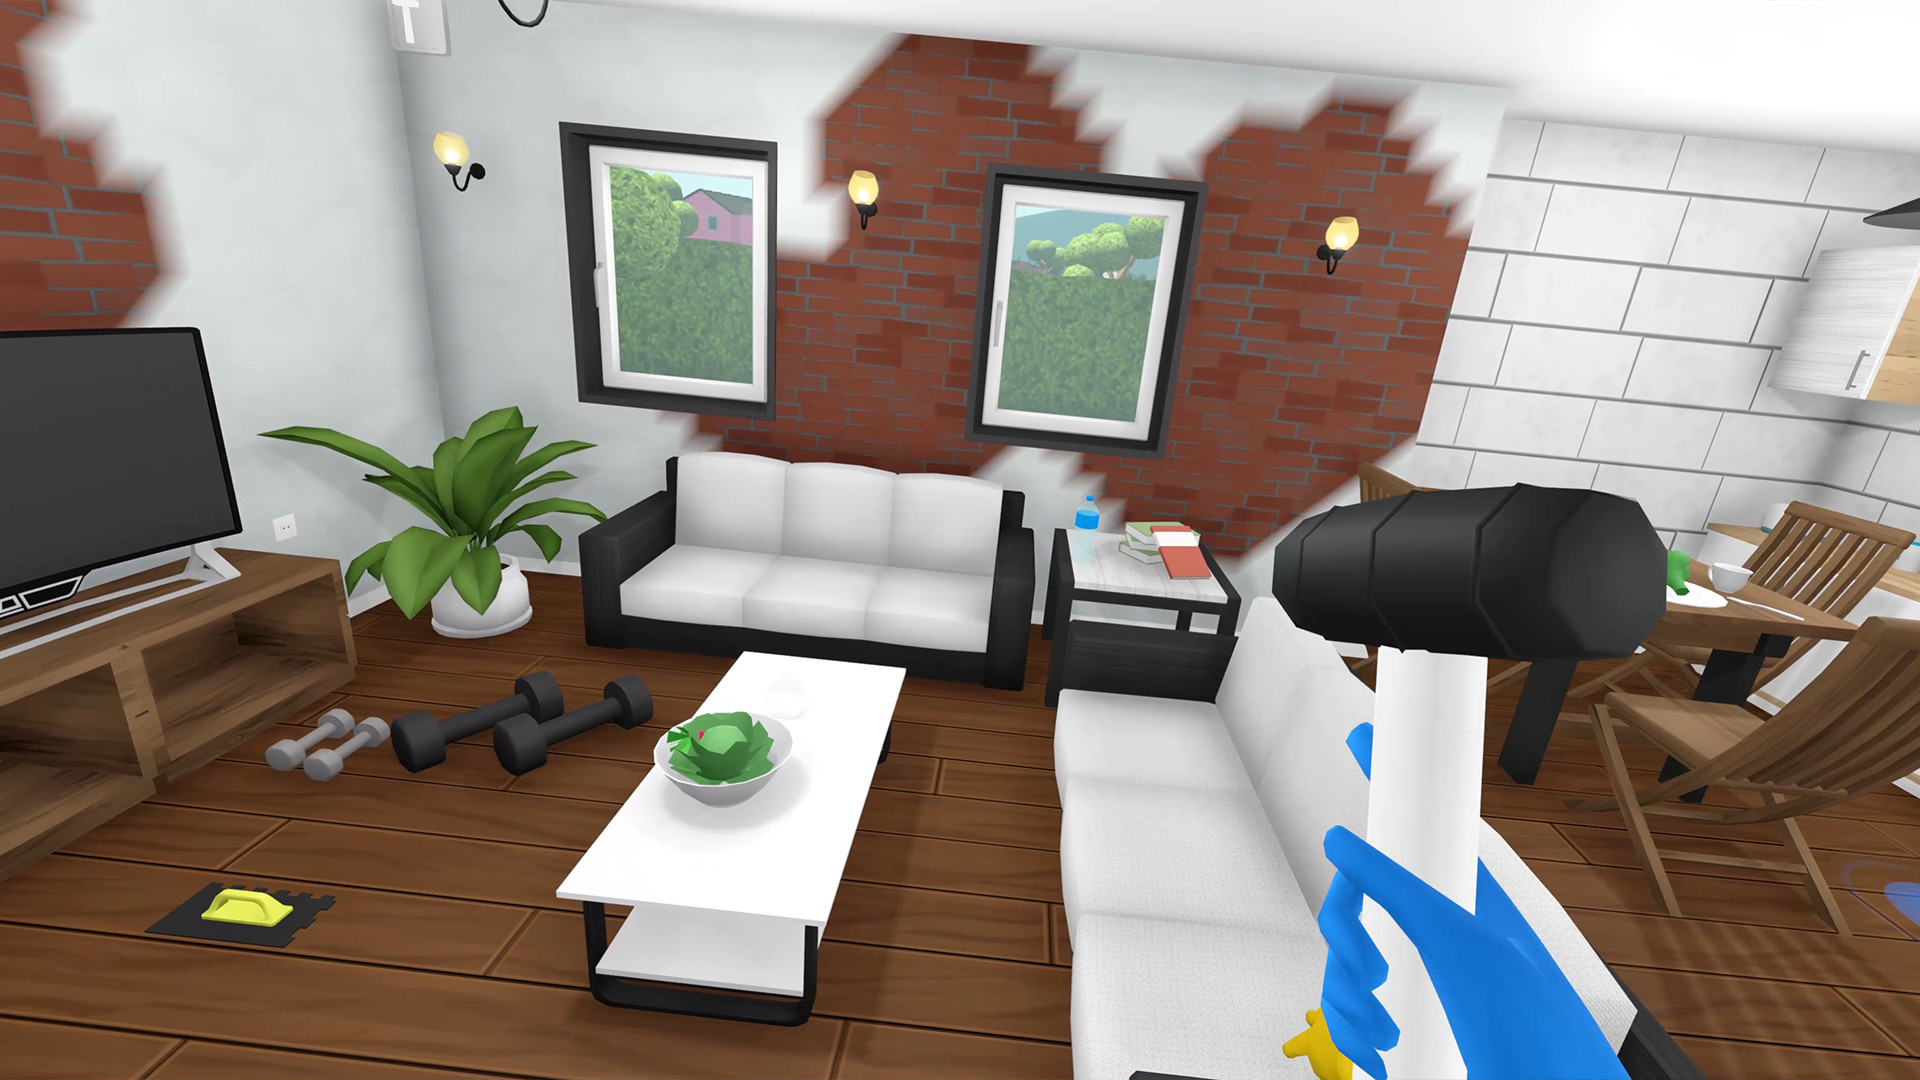 Live Out Your Home Renovation Dreams With 'House Flipper VR' - VRScout